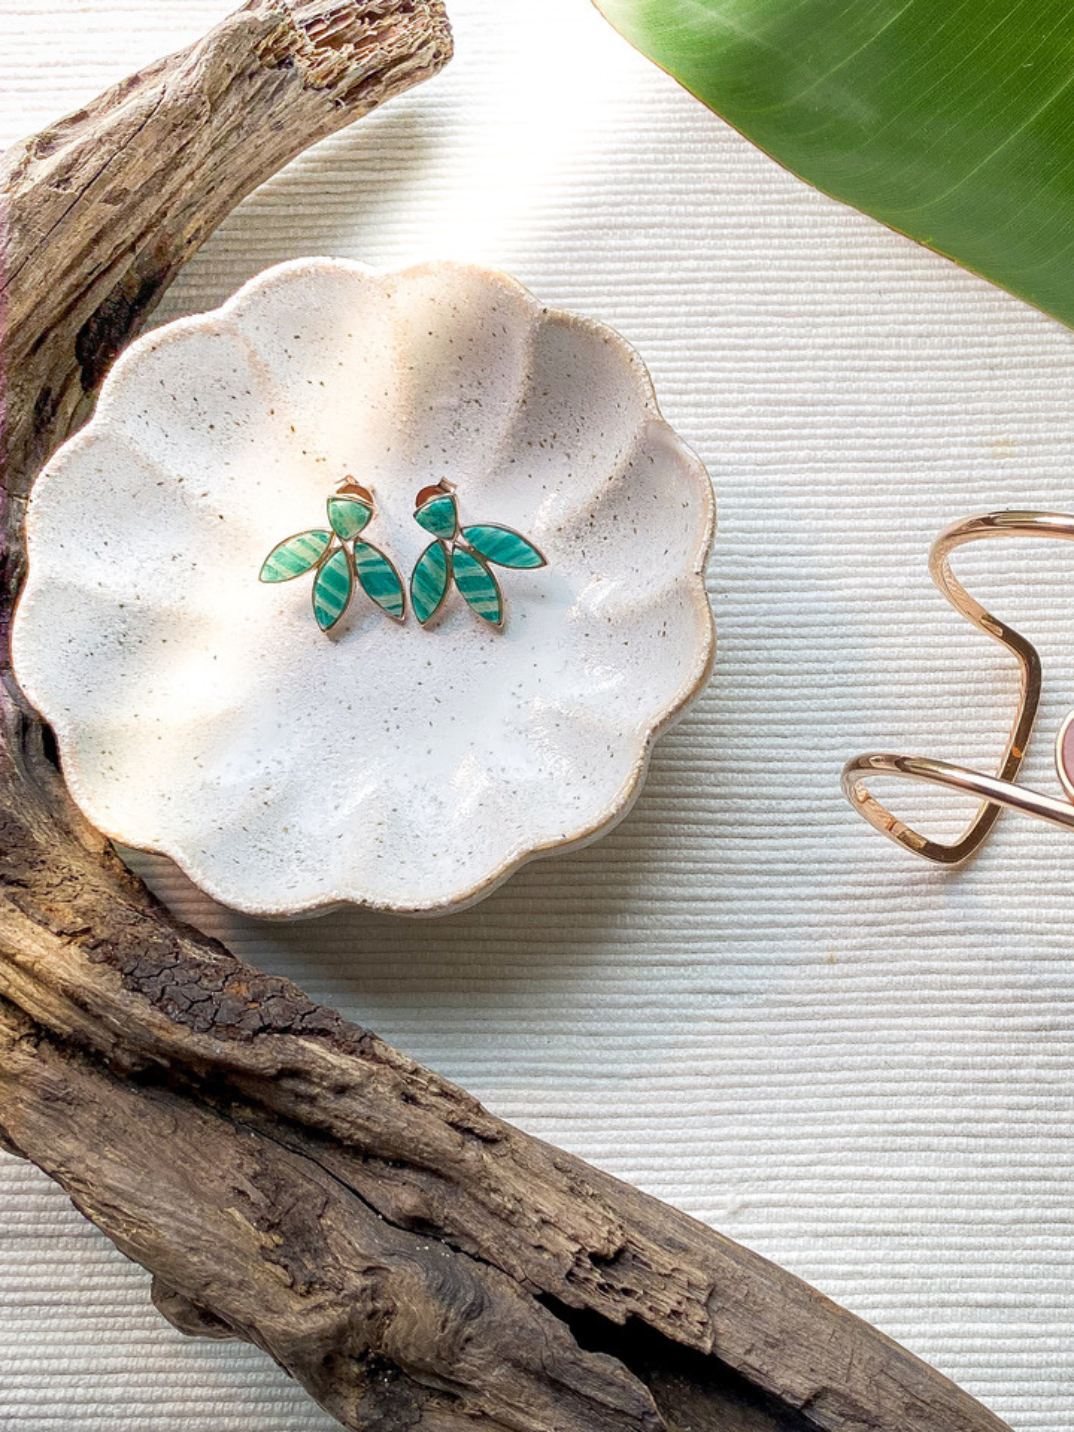 Rose gold vermeil floral escape earrings inlaid with hand cut amazonite. These earrings are exquisitely designed and inspired by nature and the inlaid floral stones found in Indian mosaics. ethical jewelry fashion